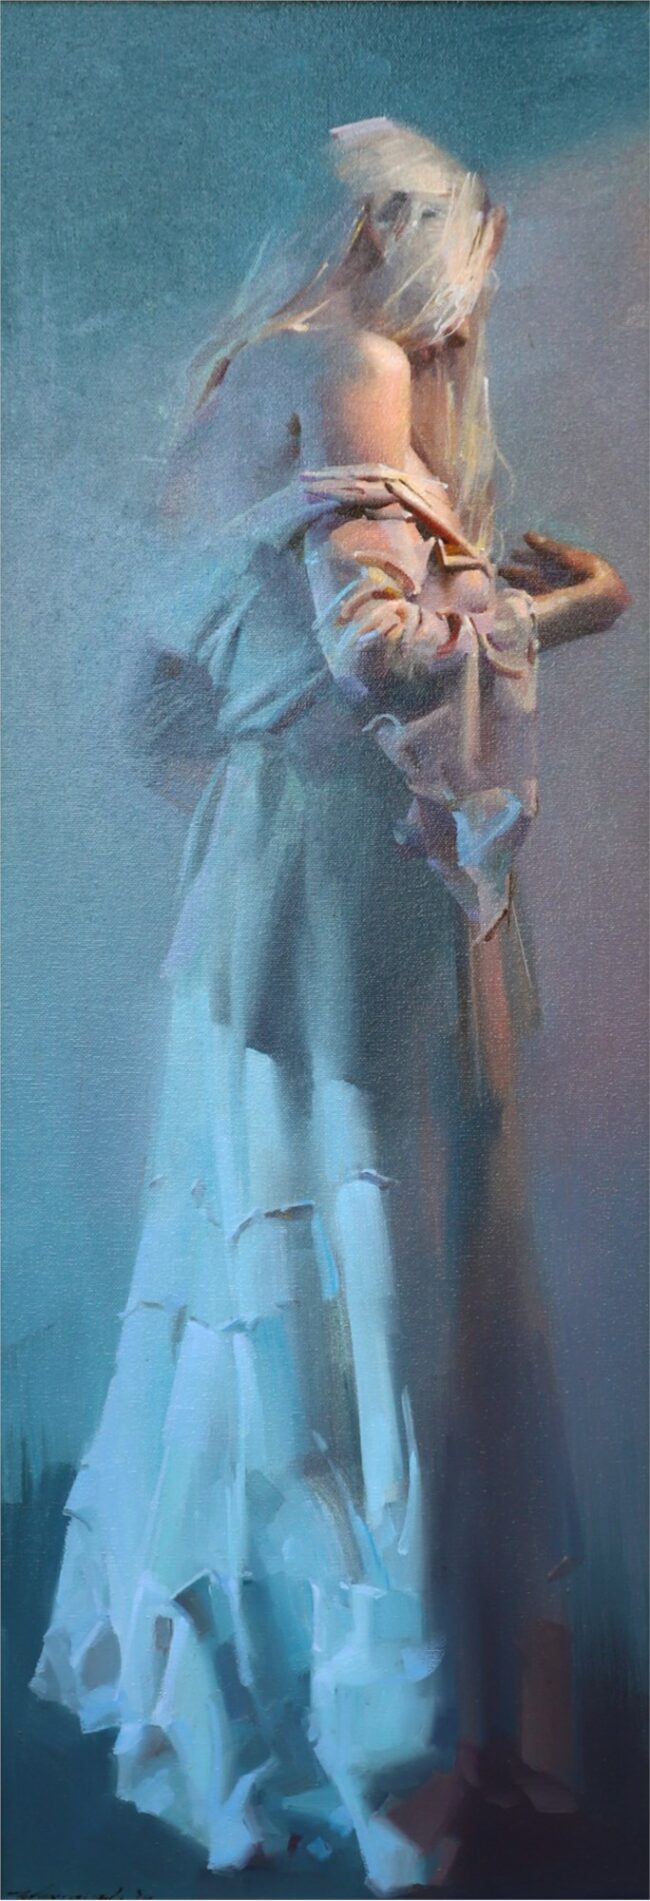 Zhaoming Wu Painting The Moment Oil on Canvas